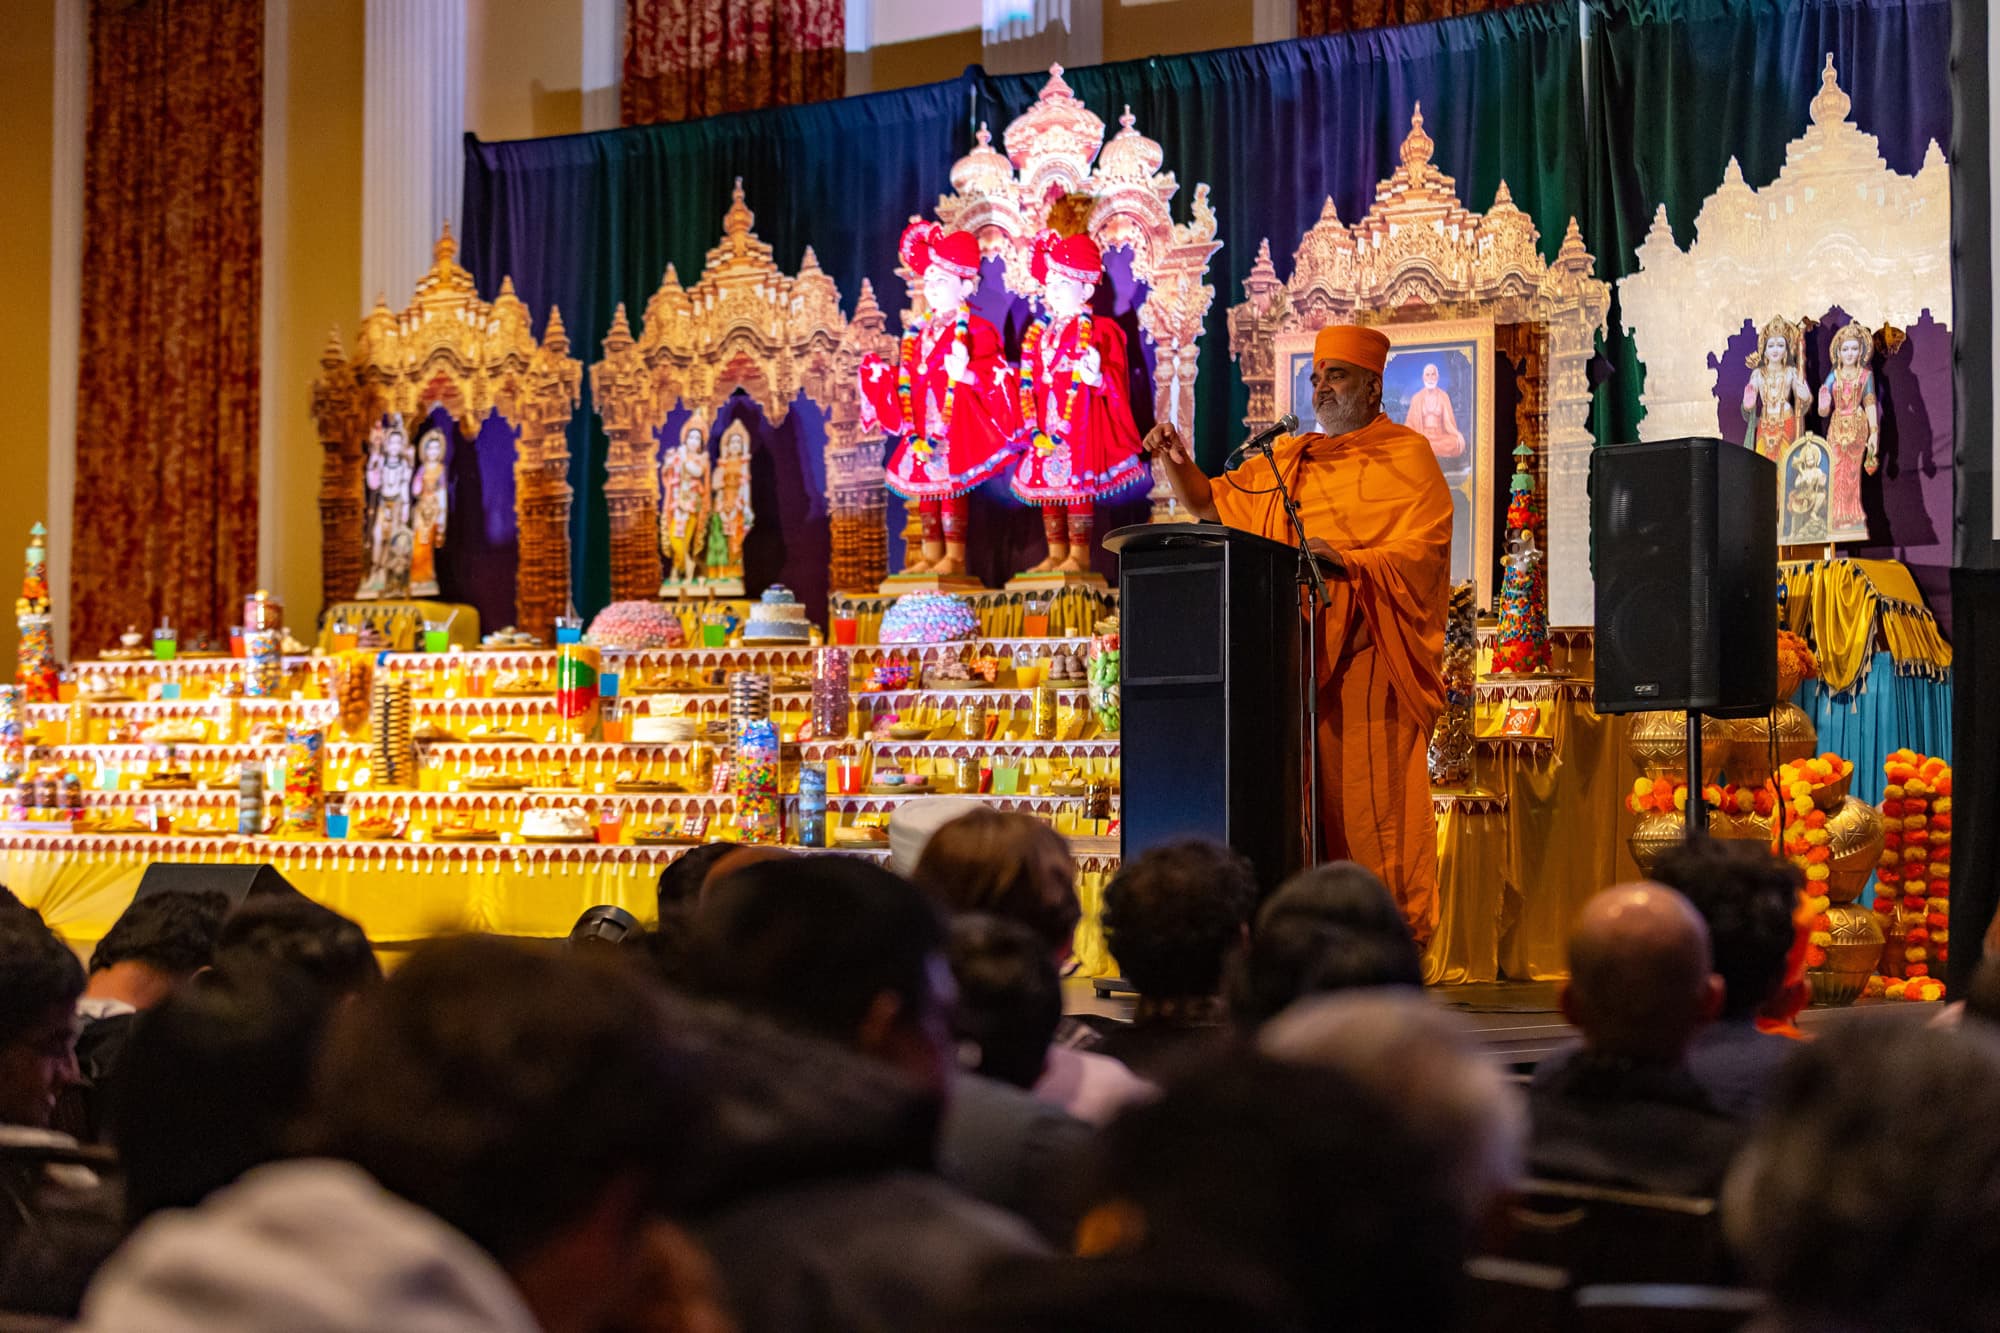 A Hindu priest speaks on stage in front of a colorful yellow display